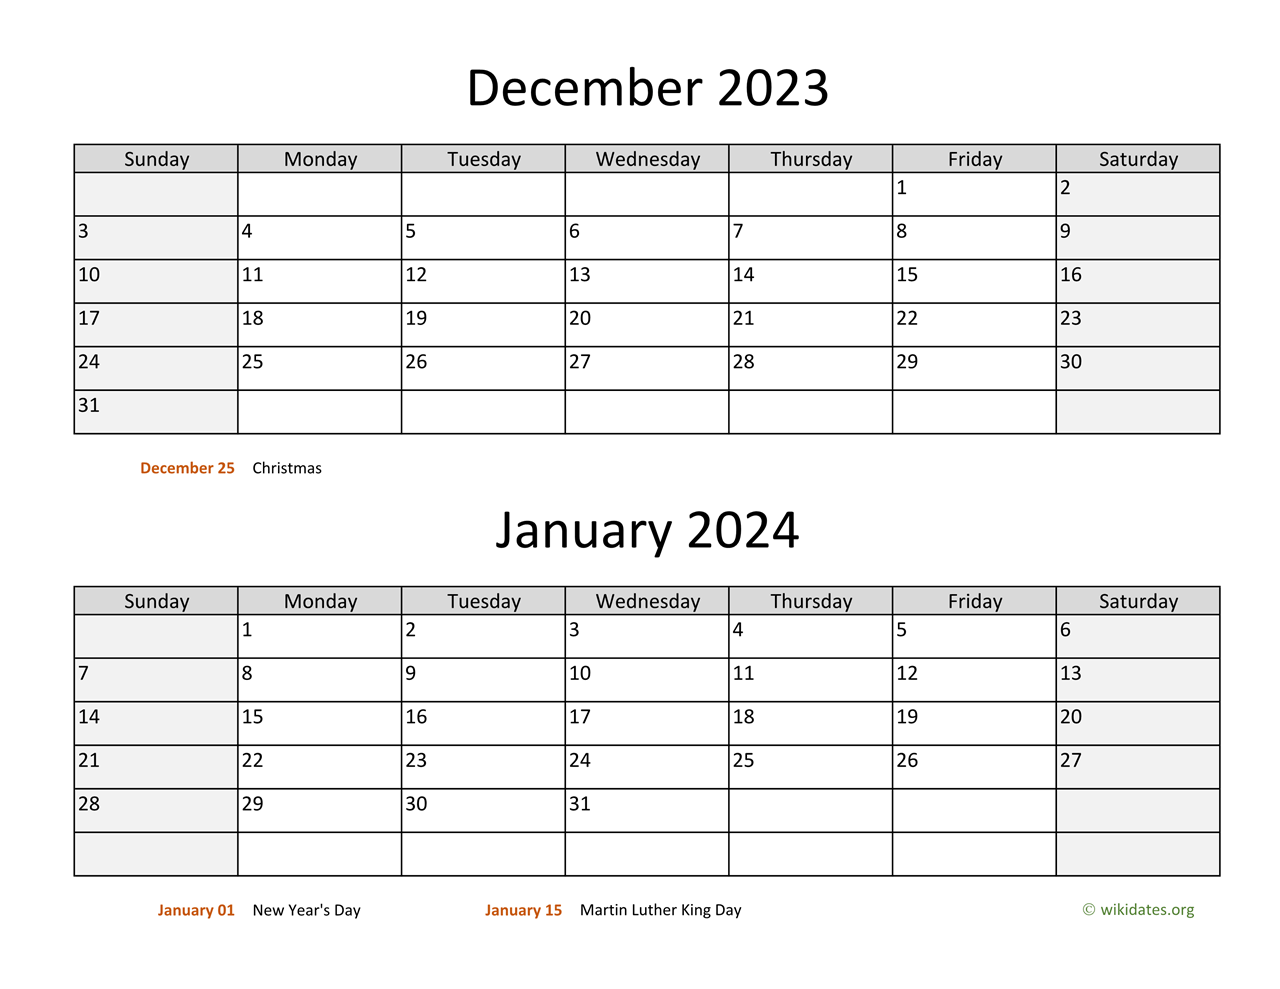 December 2023 And January 2024 Calendar | Wikidates for December 2023 And January 2024 Calendar Printable